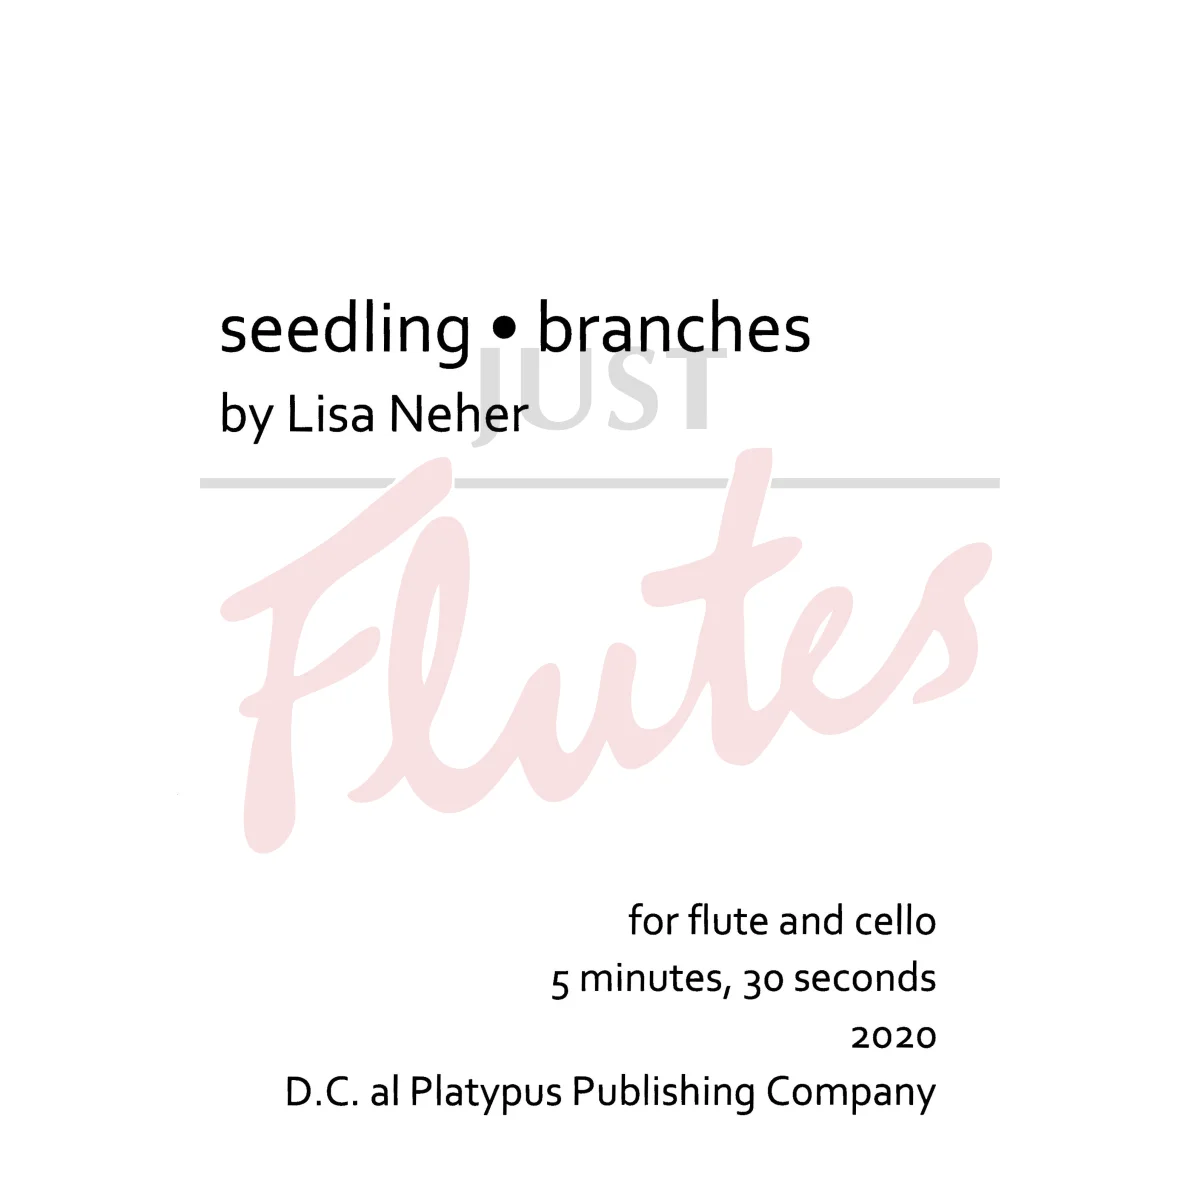 Seedling and Branches for Flute and Cello